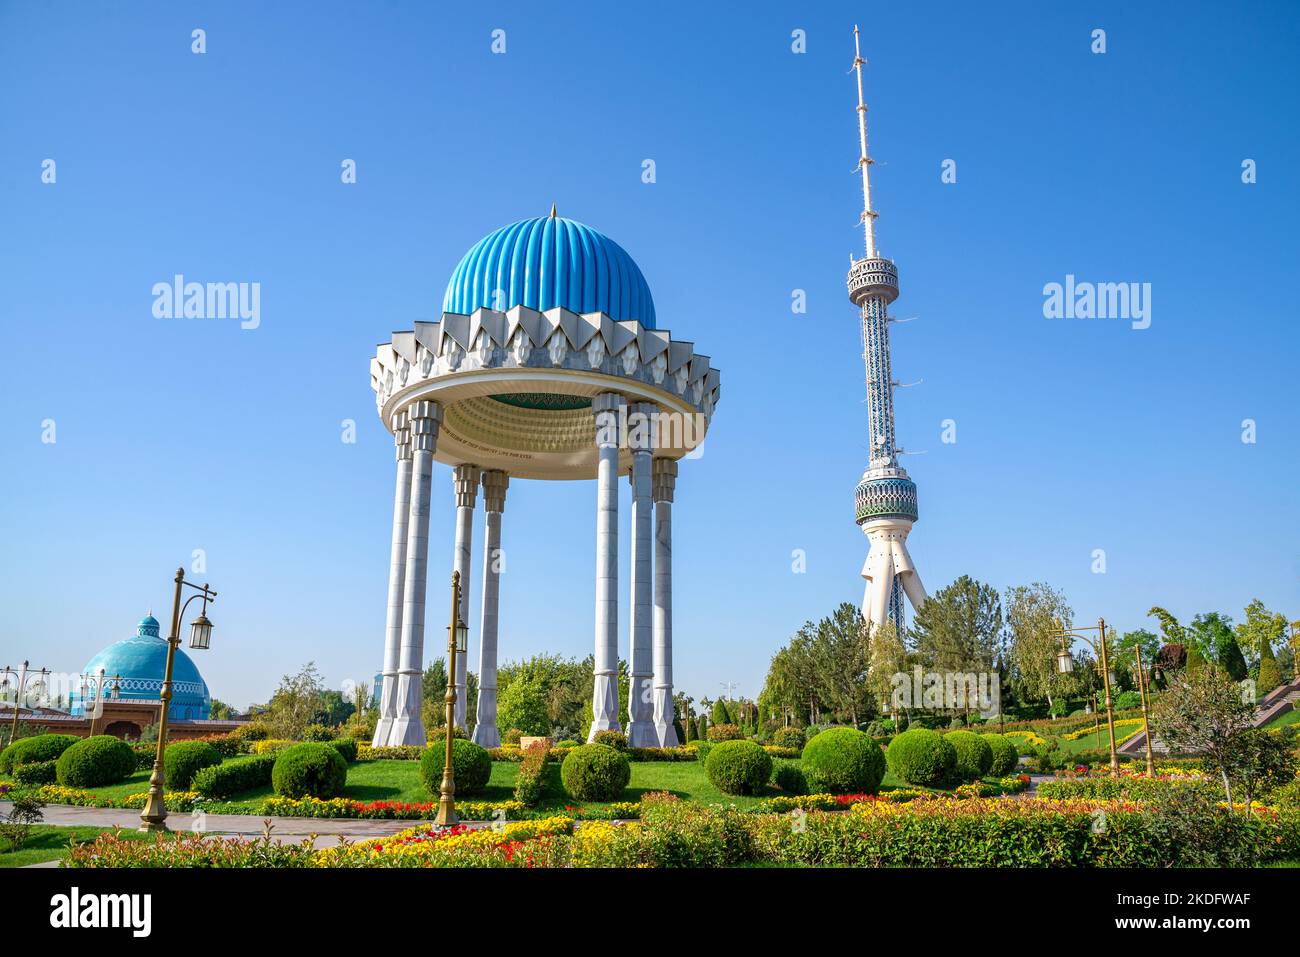 TASHKENT, UZBEKISTAN - SEPTEMBER 04, 2022: Rotunda in the memorial complex 'Memory of victims of repression' and television tower Stock Photo